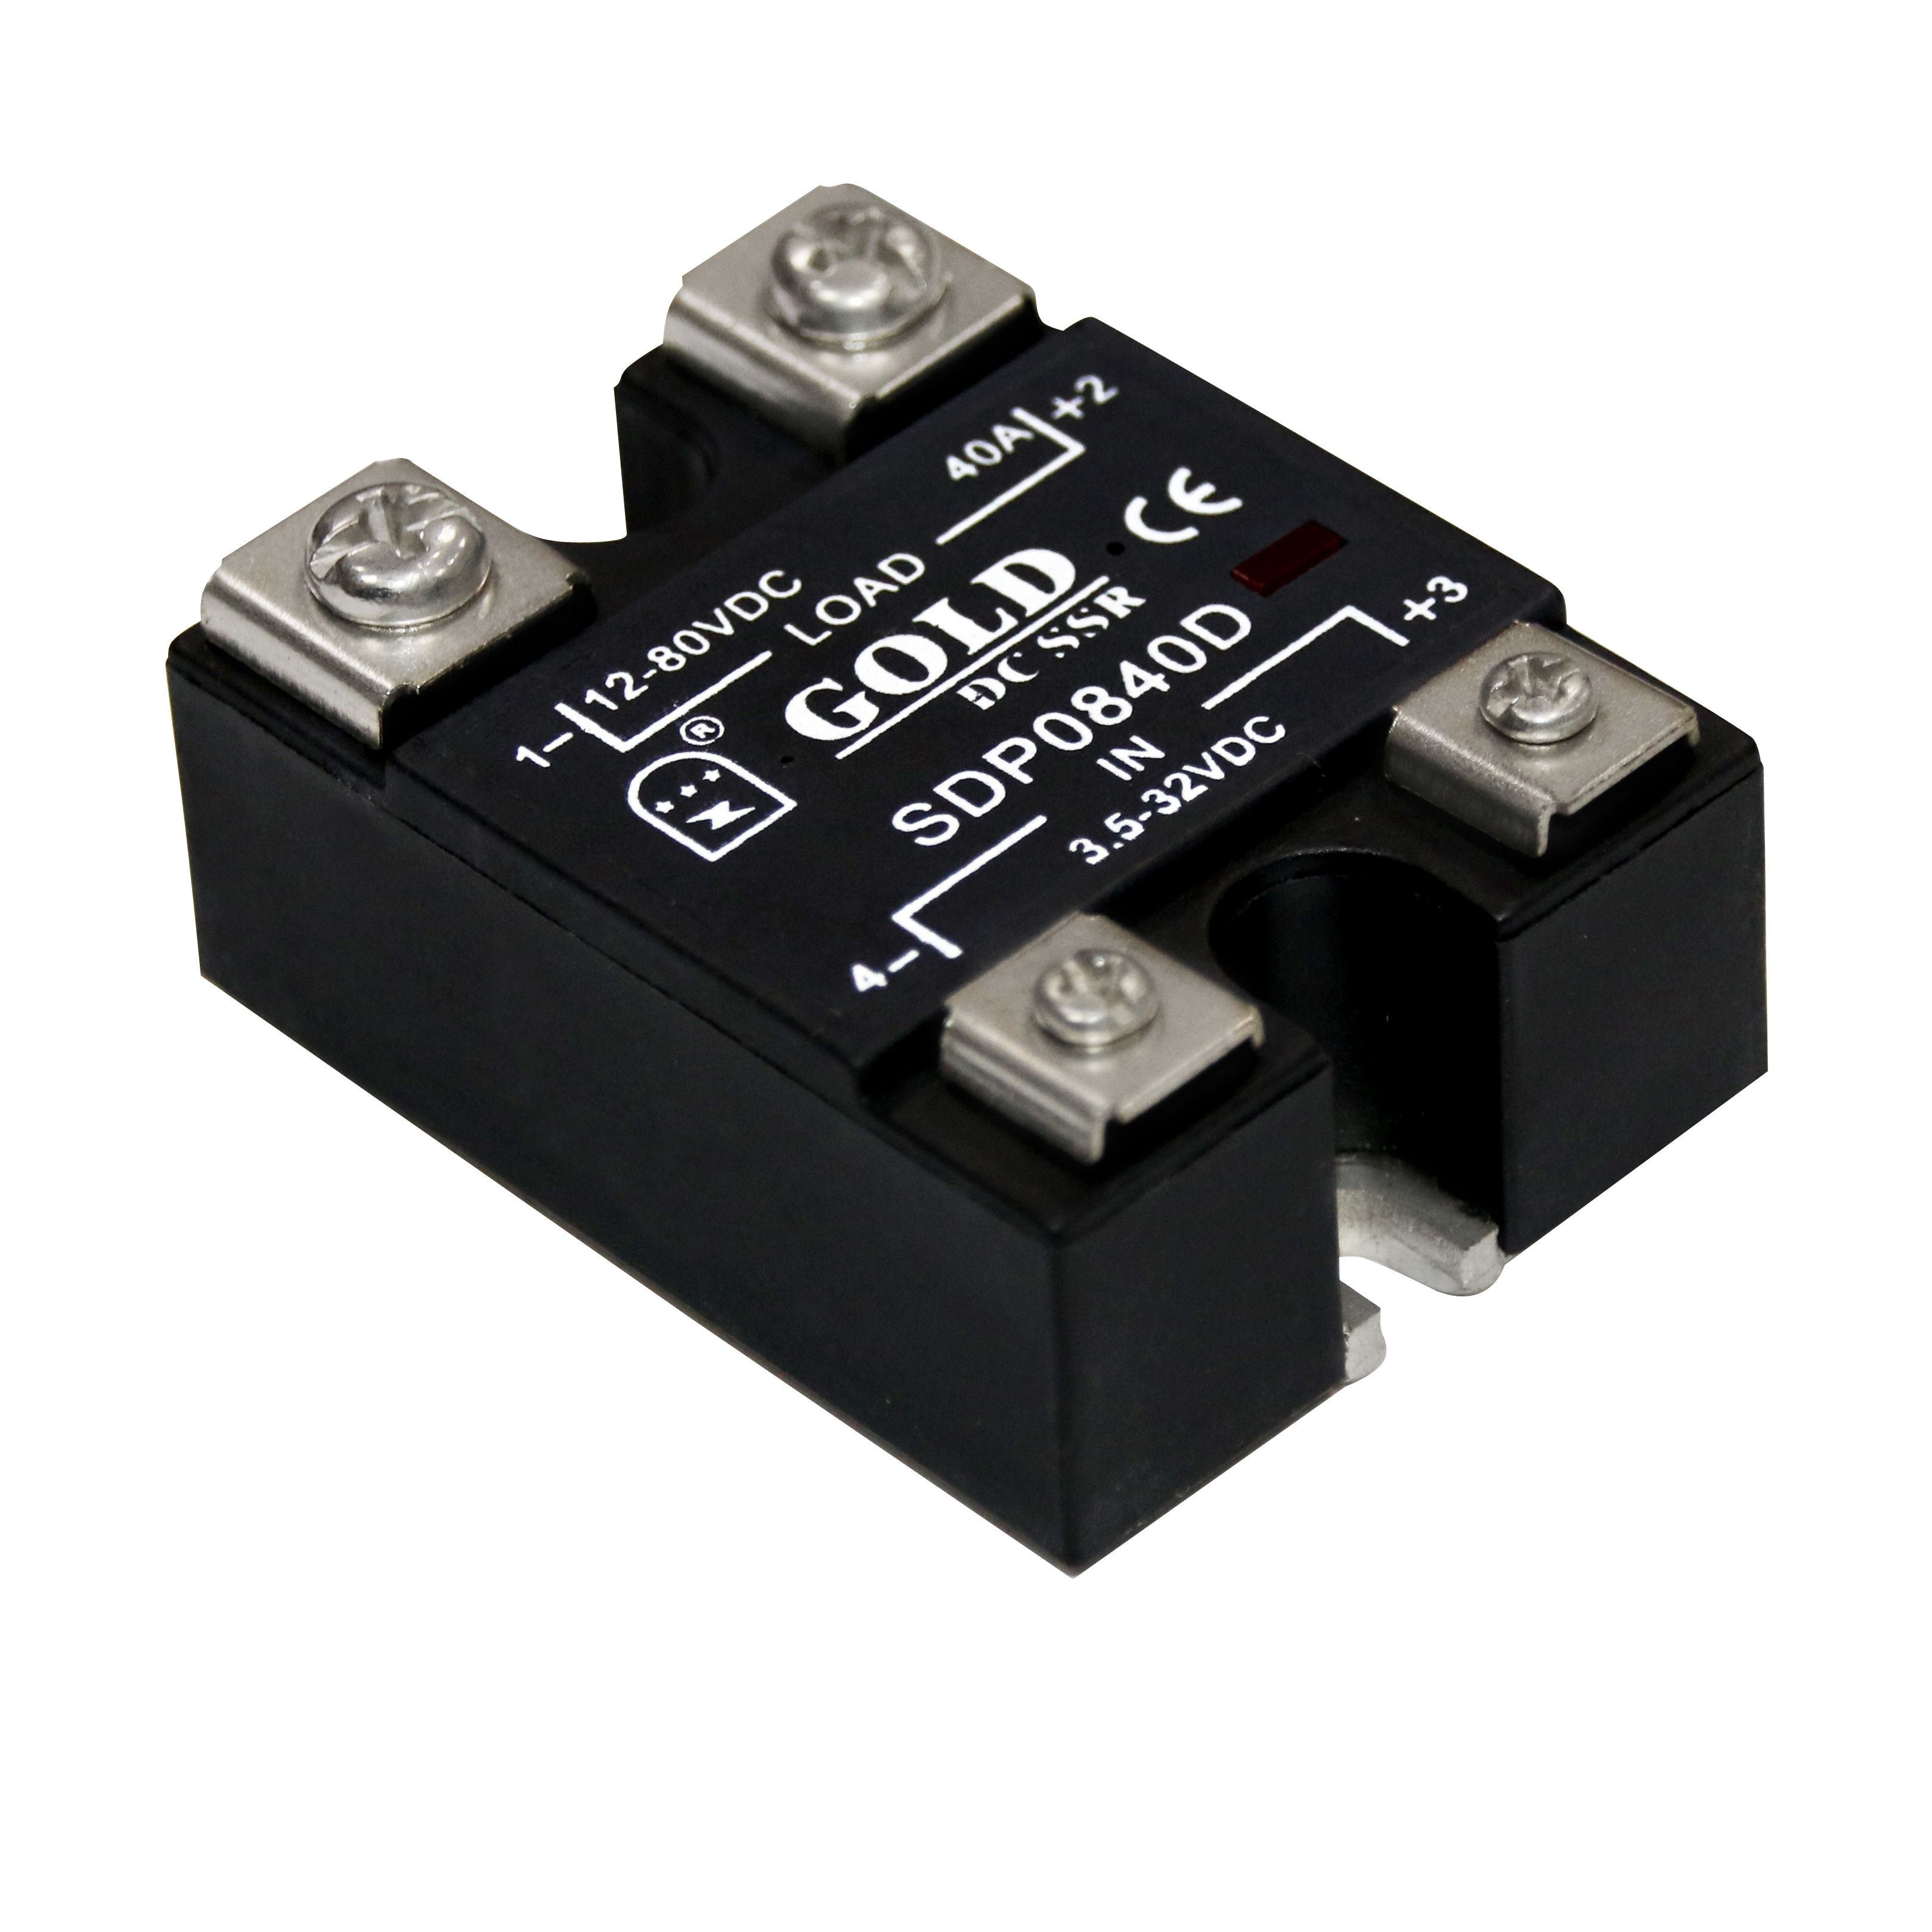 Quality Solid State Relay Dc Input Dc Output for sale